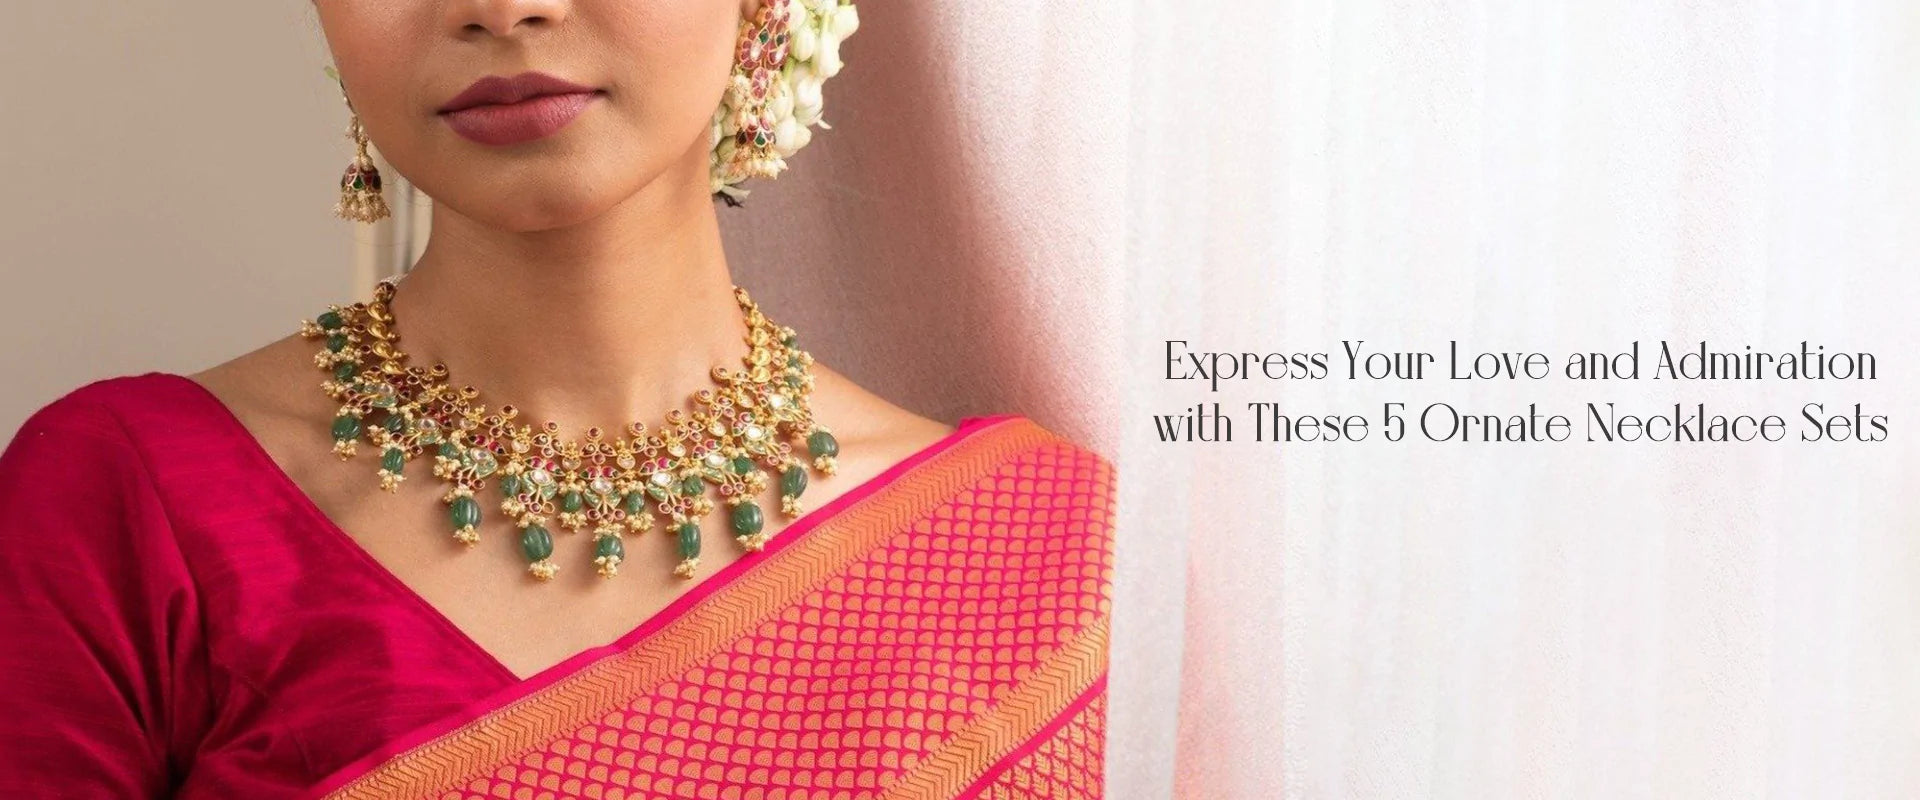 Express Your Love and Admiration with These 5 Ornate Necklace Sets